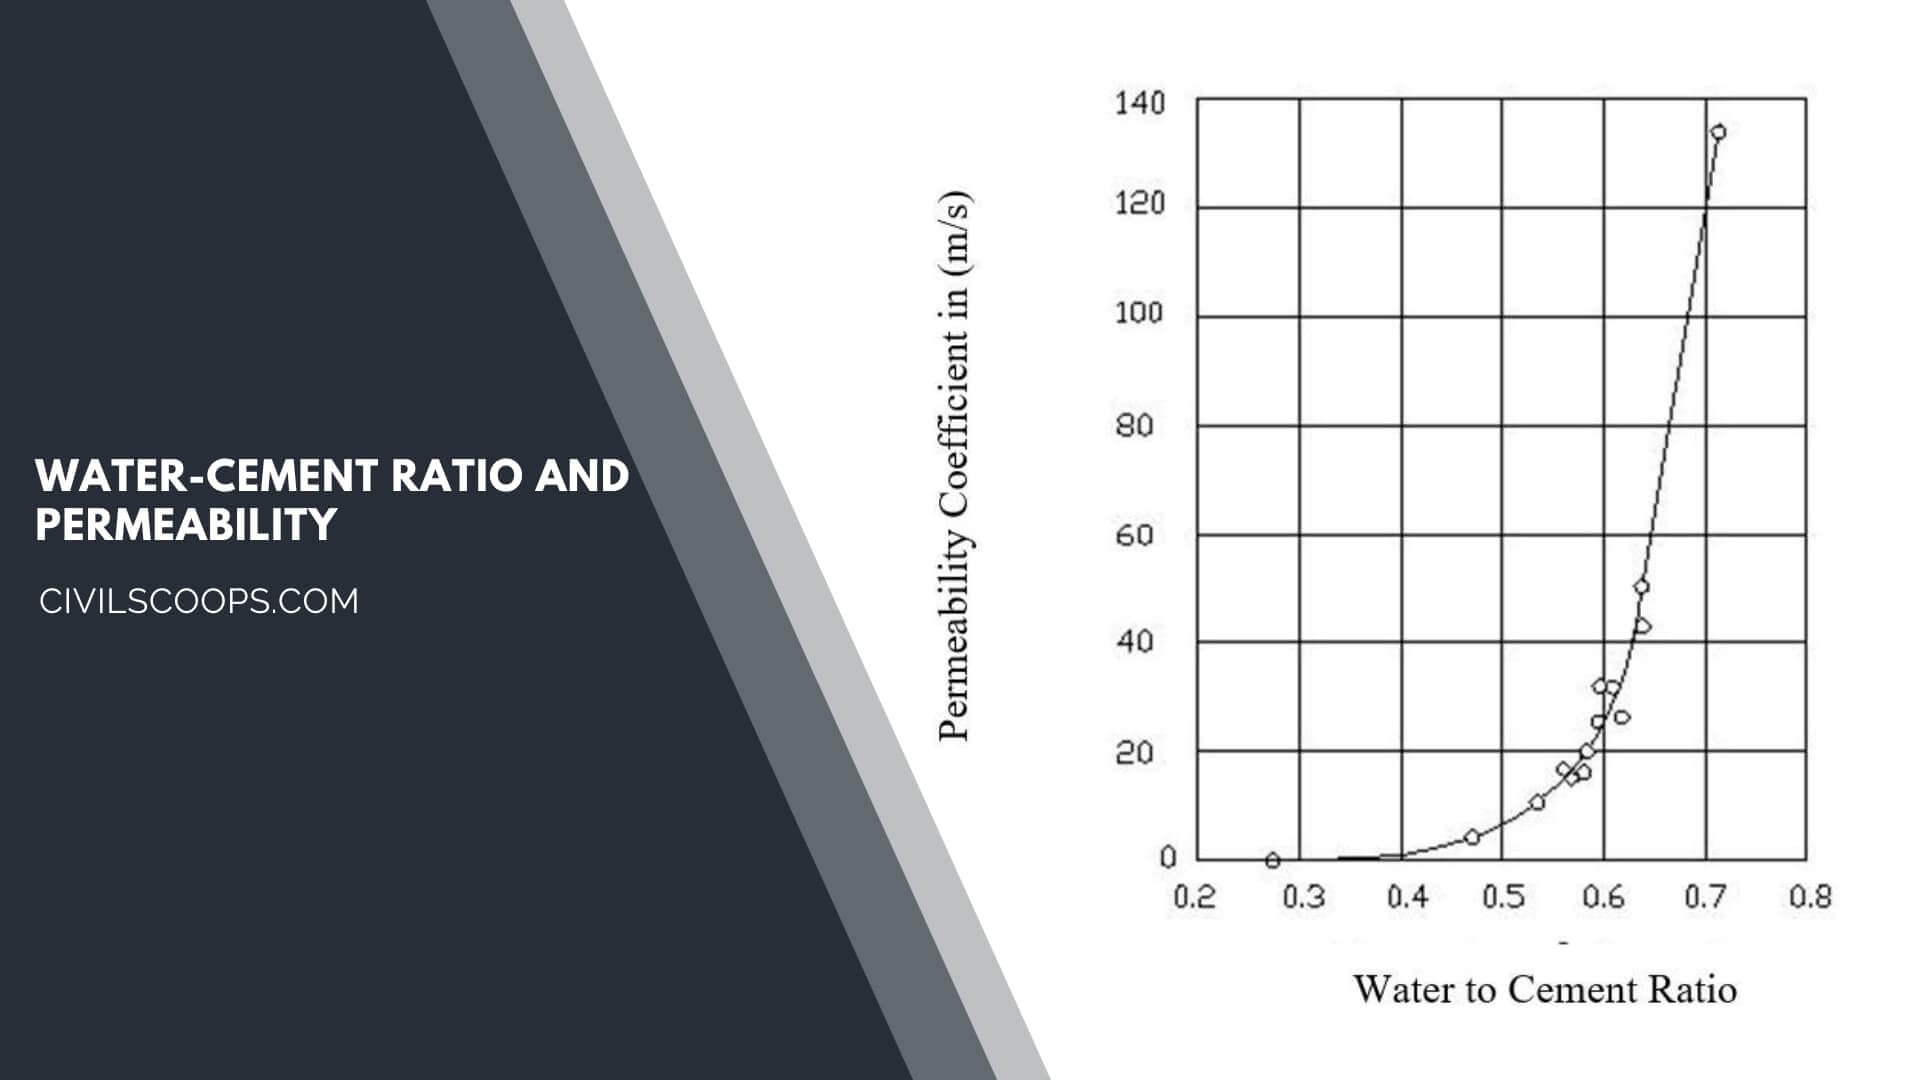 Water-Cement Ratio and Permeability